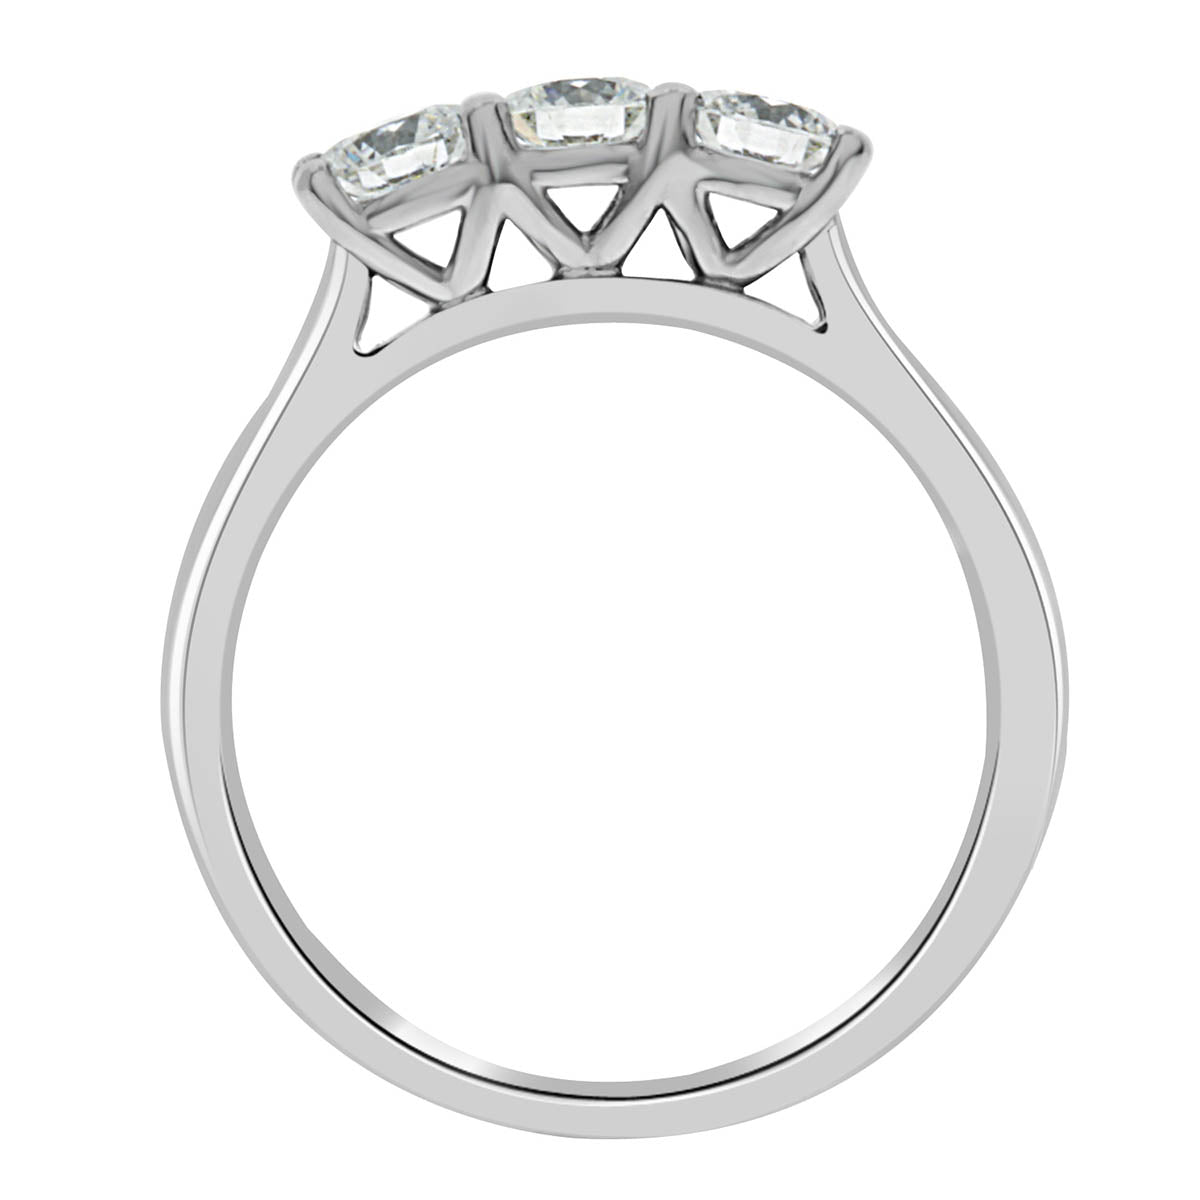 Three Stone Engagement Ring made of white gold in an upright position